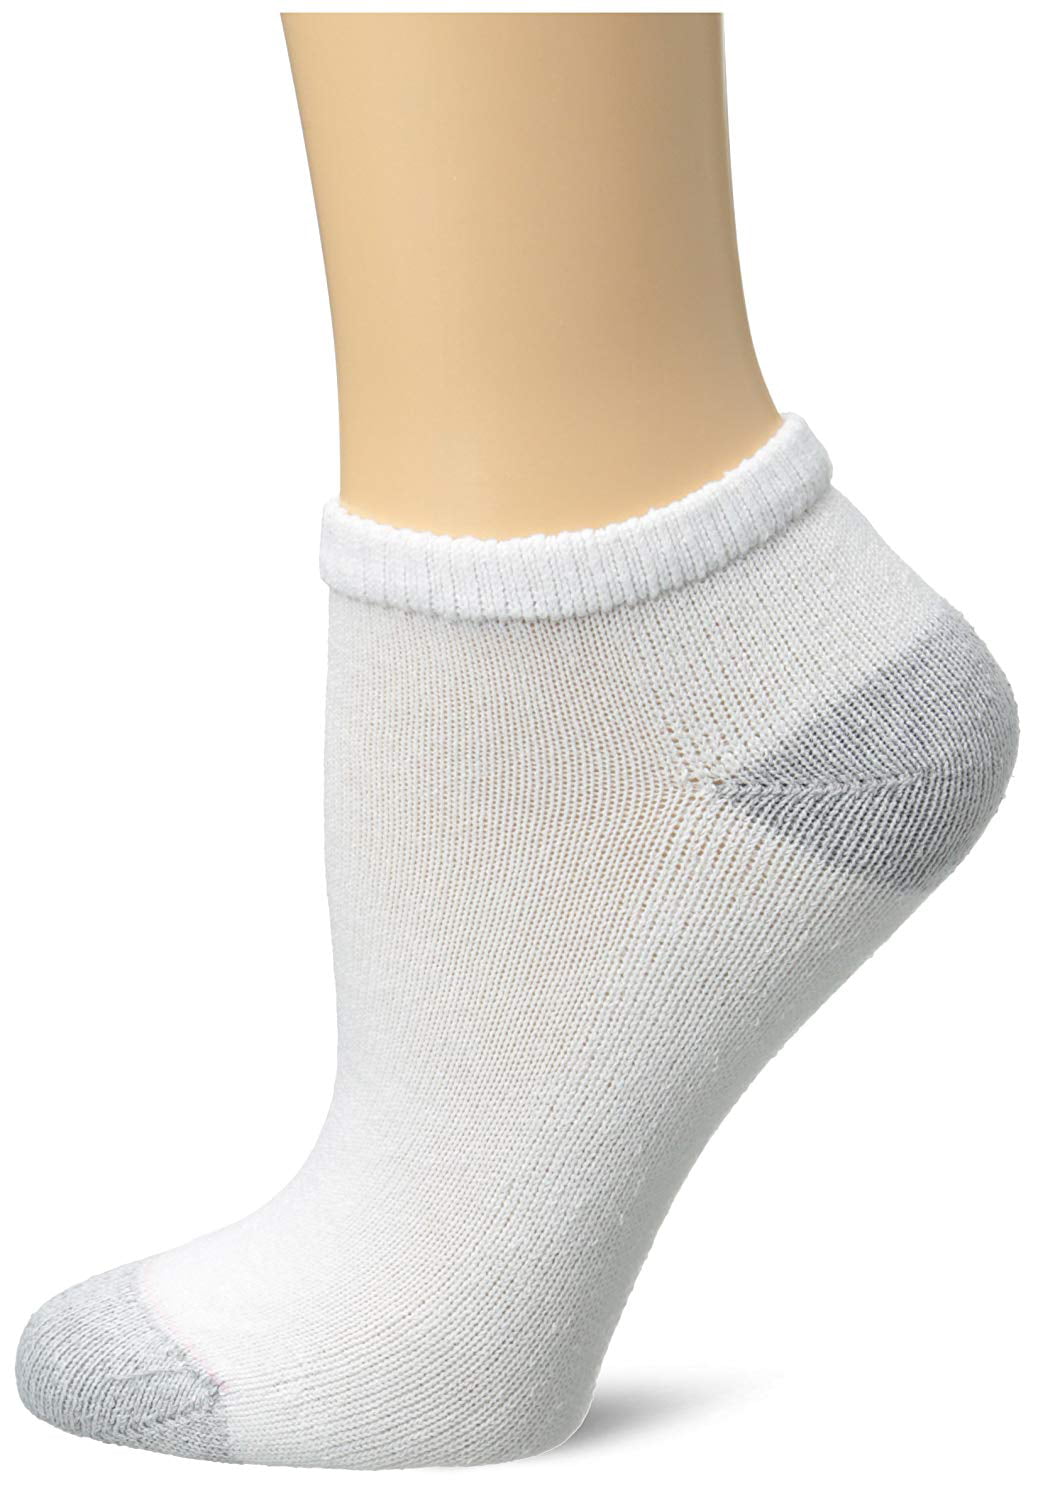 Hanes - 10 Pack Cushioned Women's Athletic Socks - Low-Cut (Size 5-9 ...